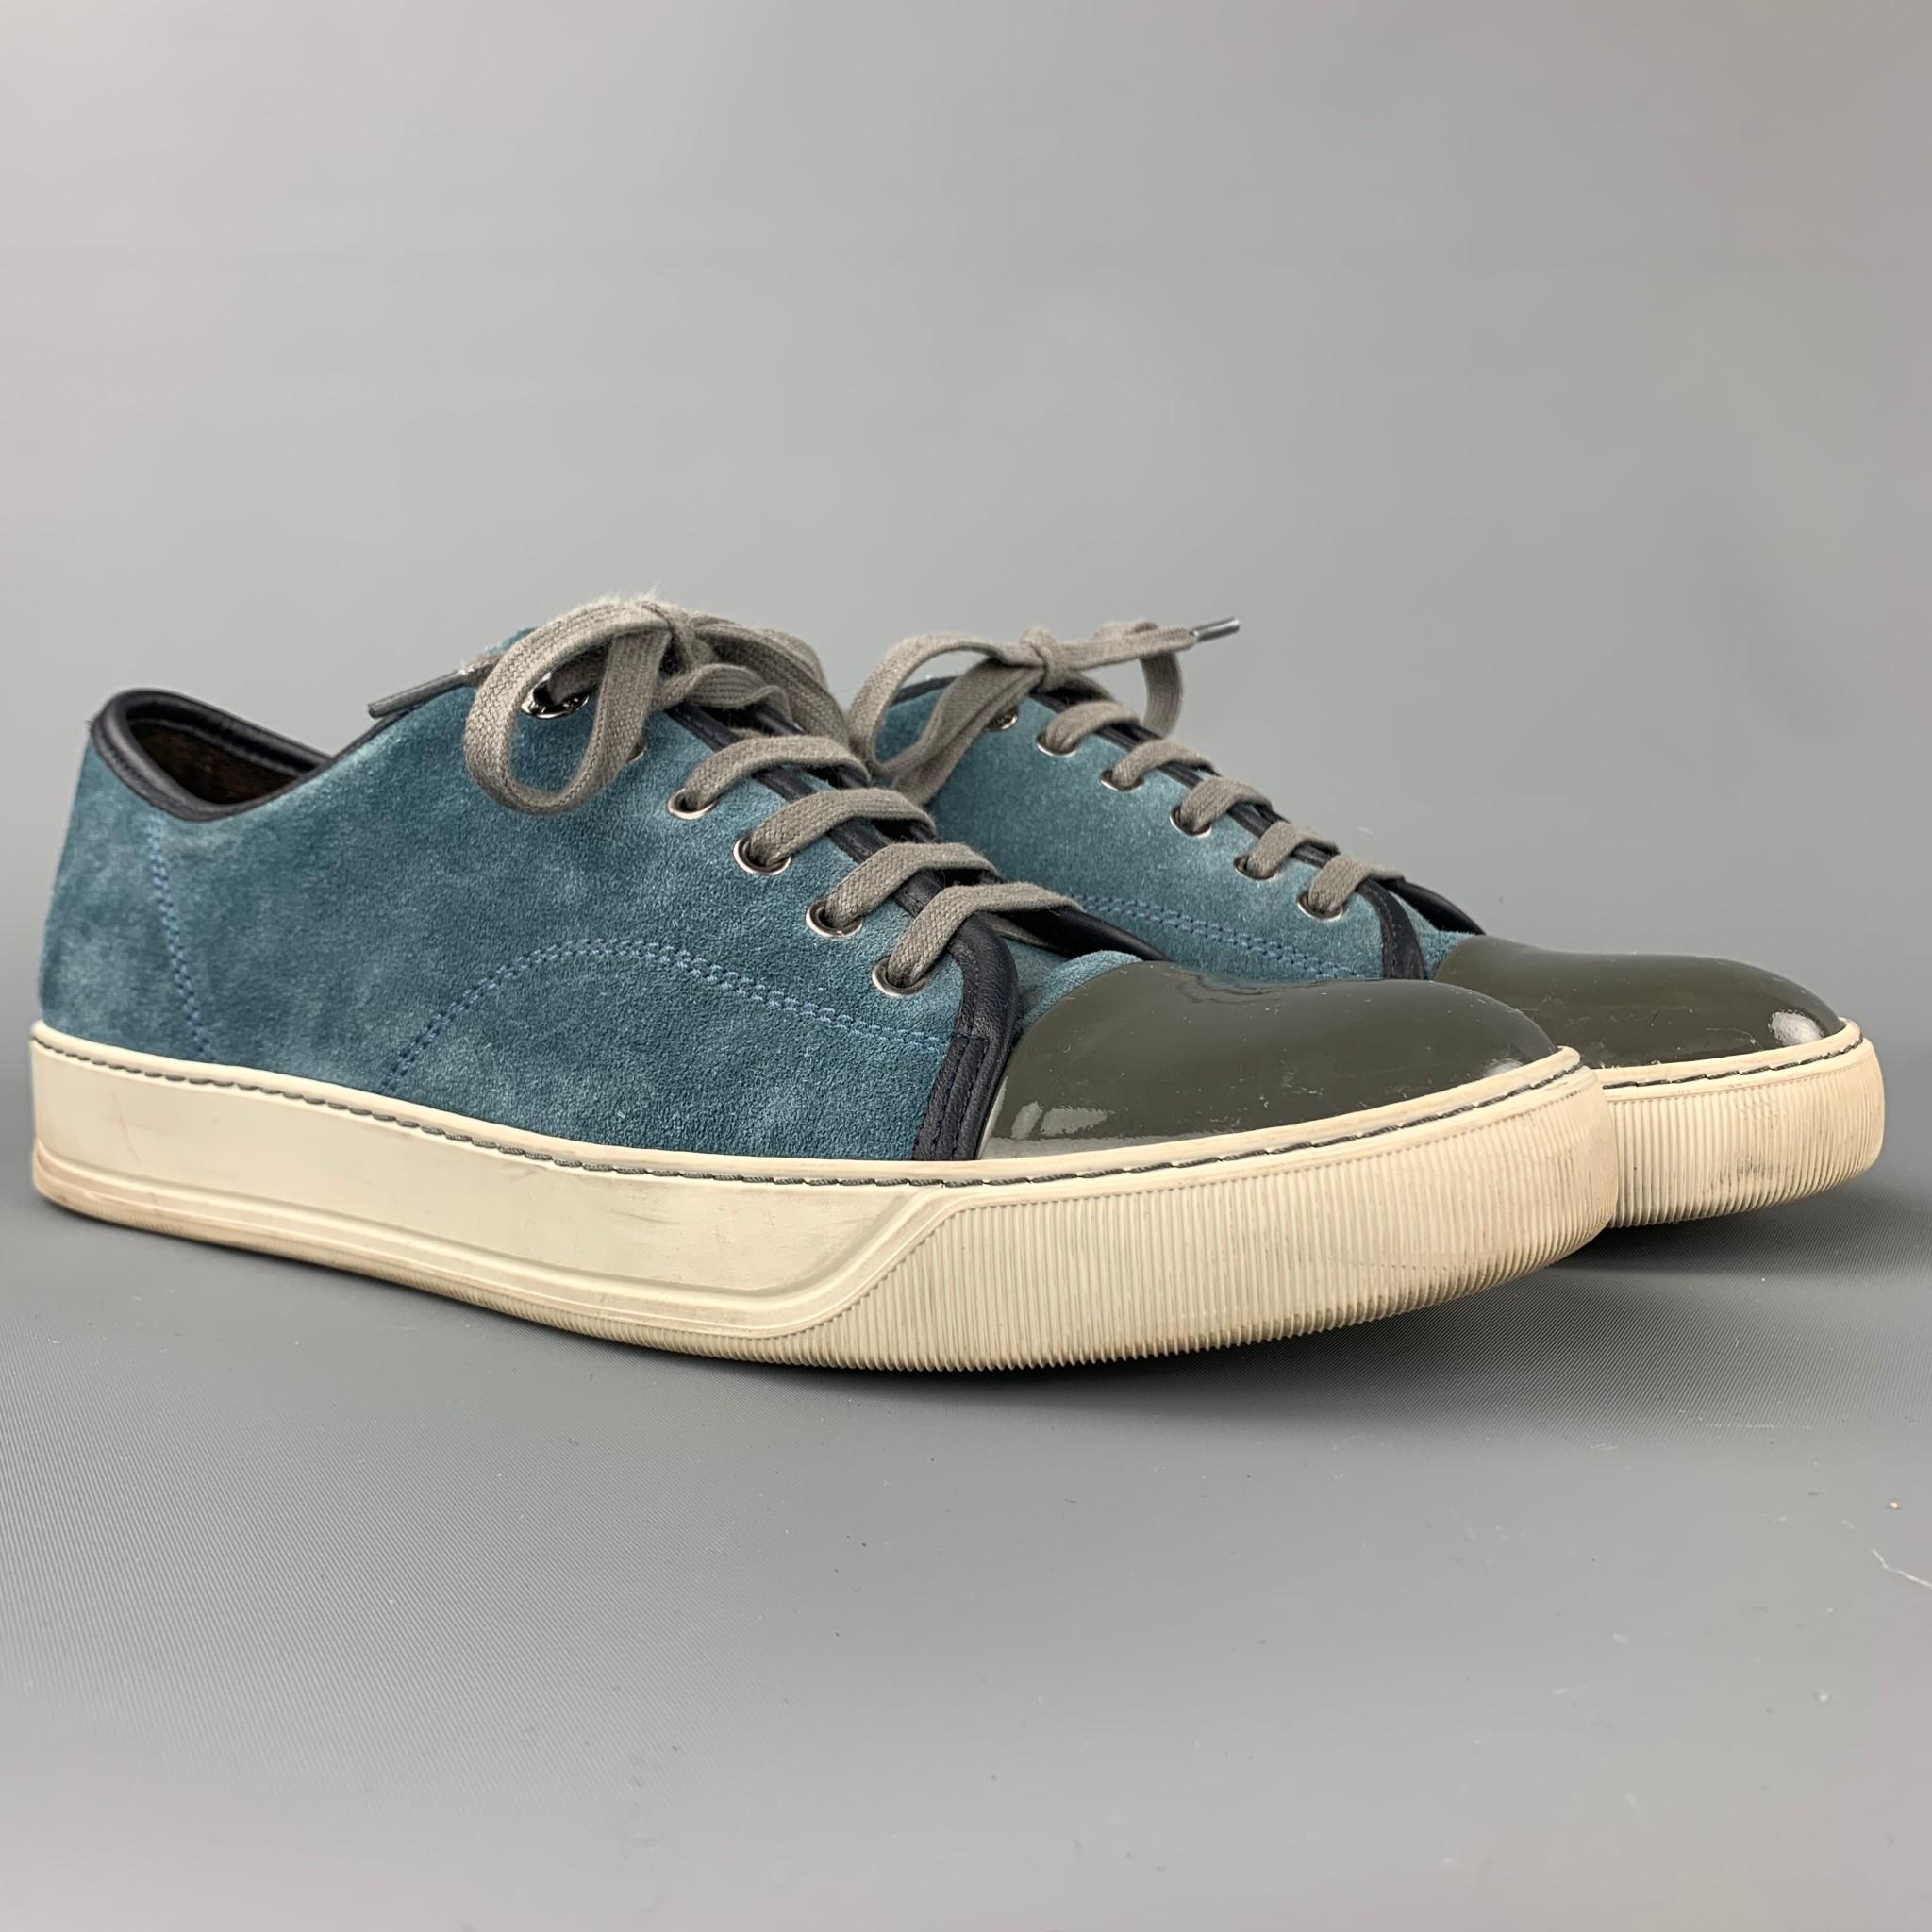 LANVIN sneakers comes in a blue suede with a gray trim featuring a rubber sole and a lace up closure. Moderate wear. Made in Portugal.

Good Pre-Owned Condition.
Marked: 8

Outsole:

11.5 in. x 4 in. 